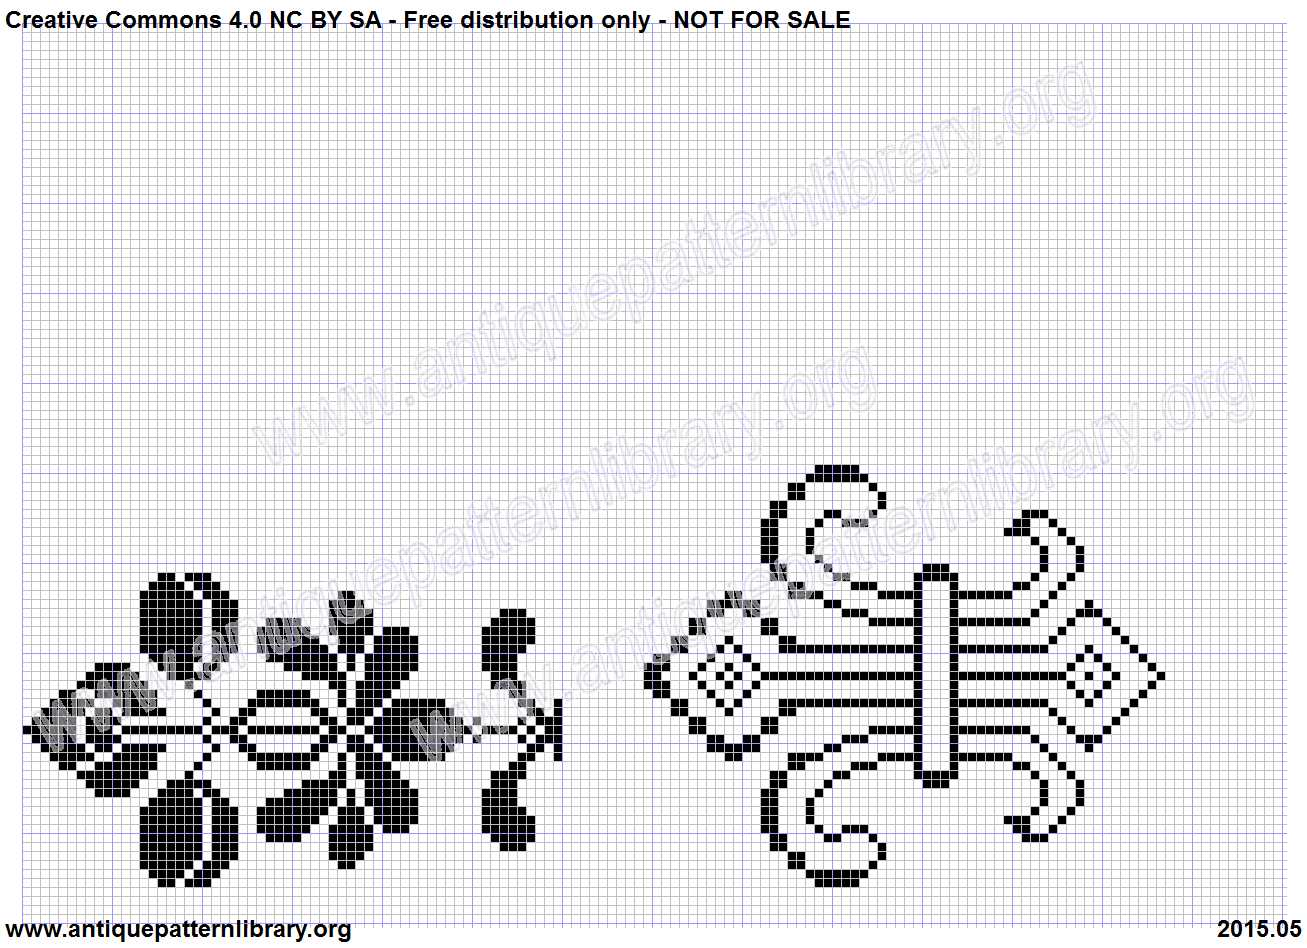 F-SF001 1730 Embroidery Pattern book